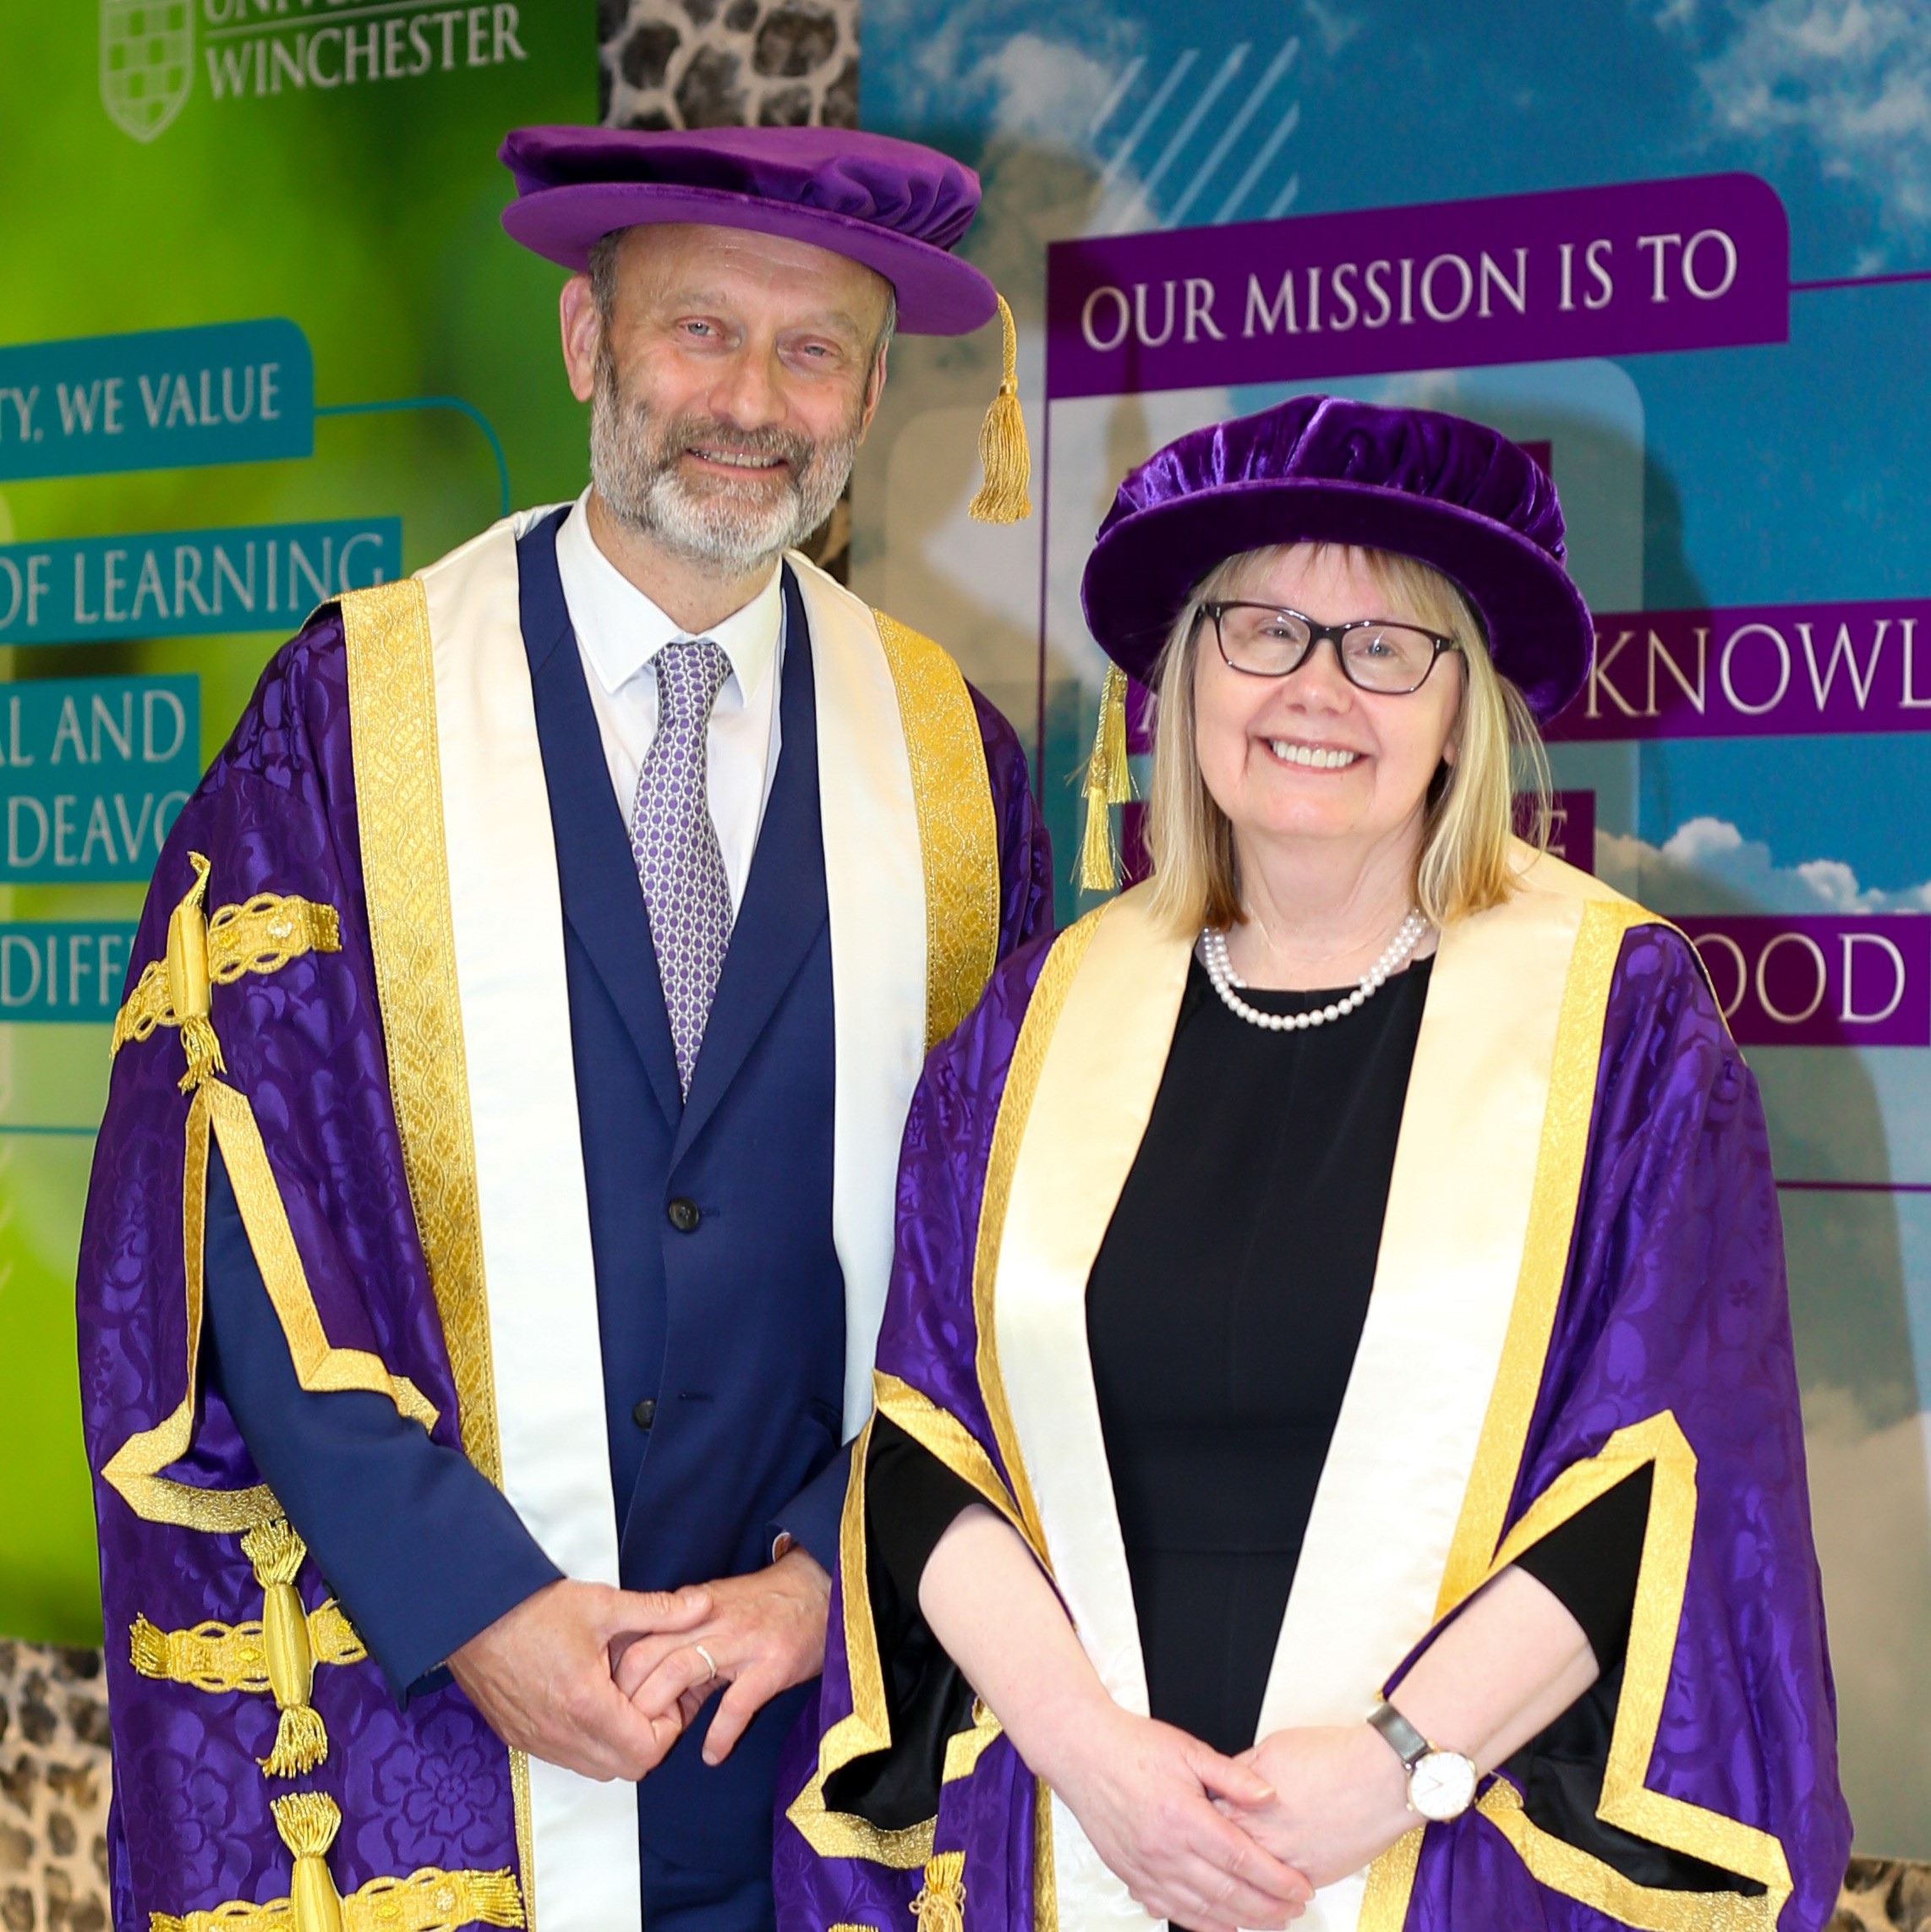 Four people in purple academic robes